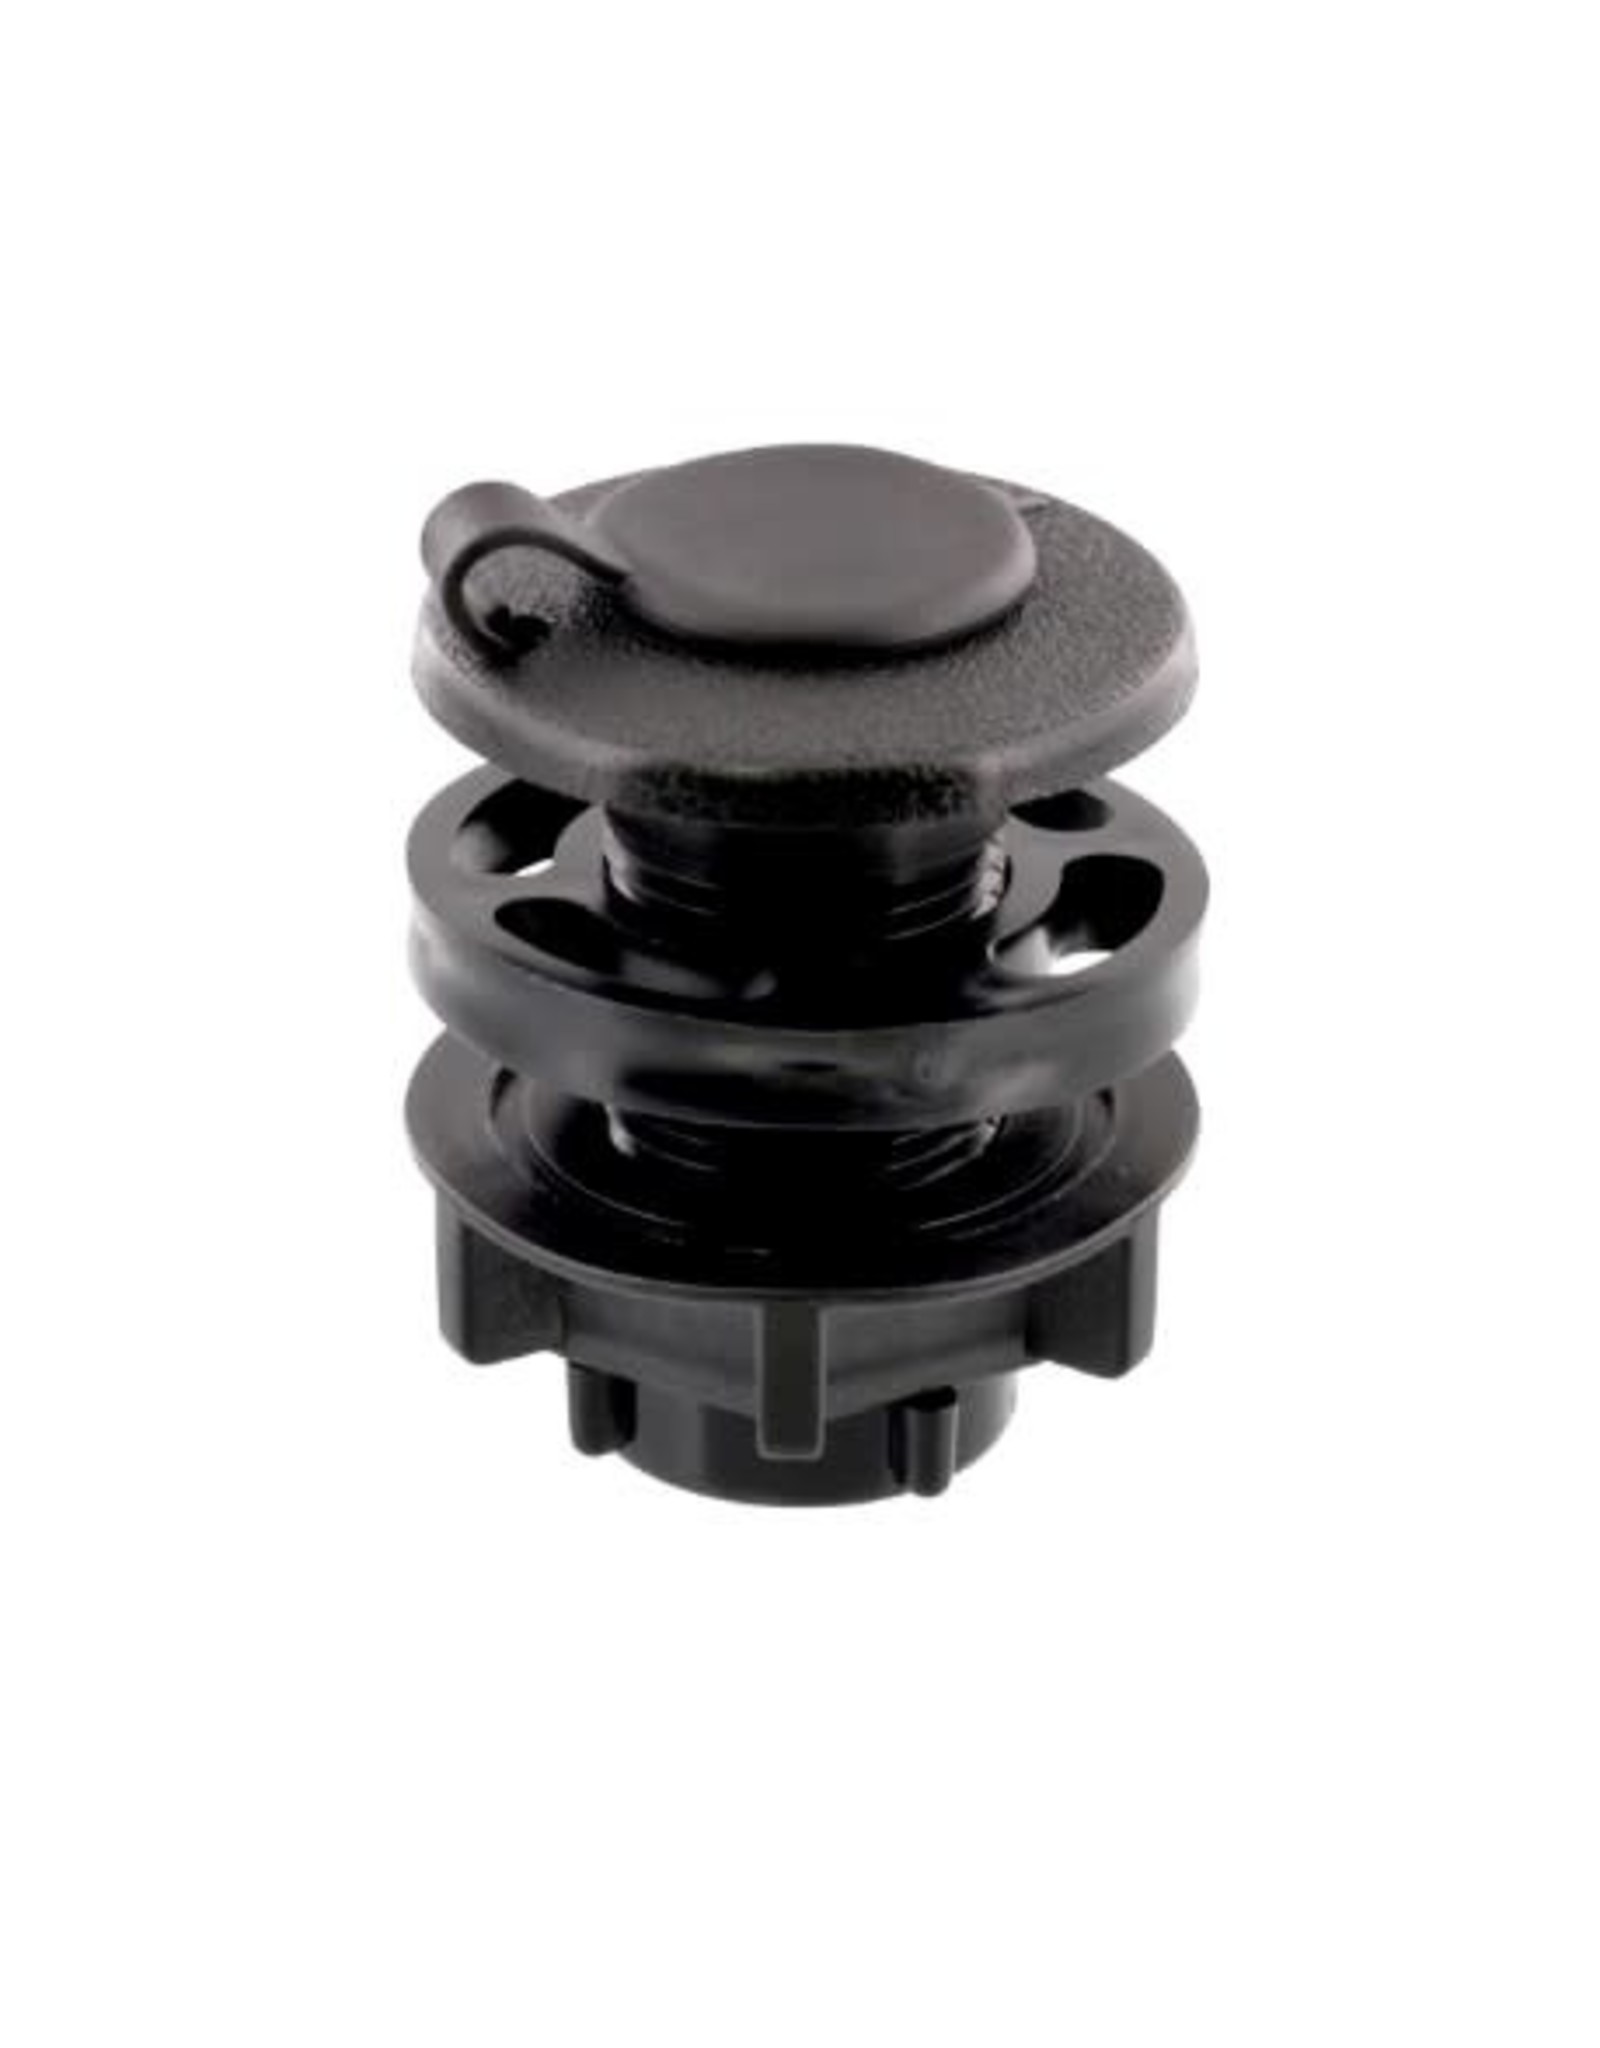 Scotty Scotty Compact threaded deck mount